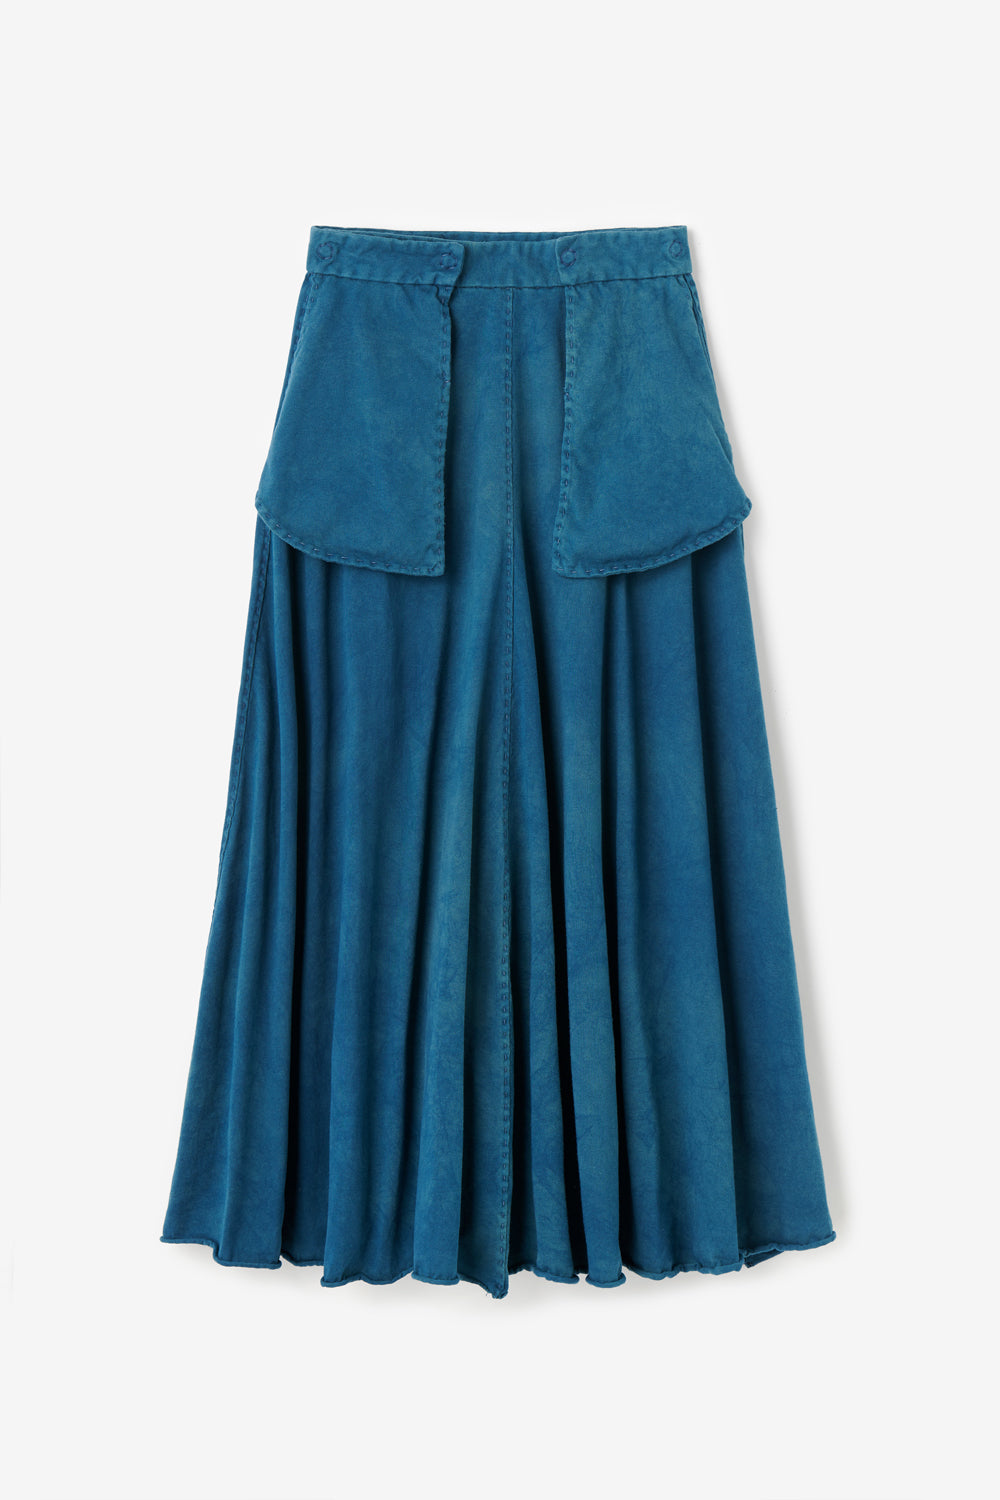 The Elle Skirt in hand-sewn organic cotton with outside pockets. Shown in hand-dyed indigo color.